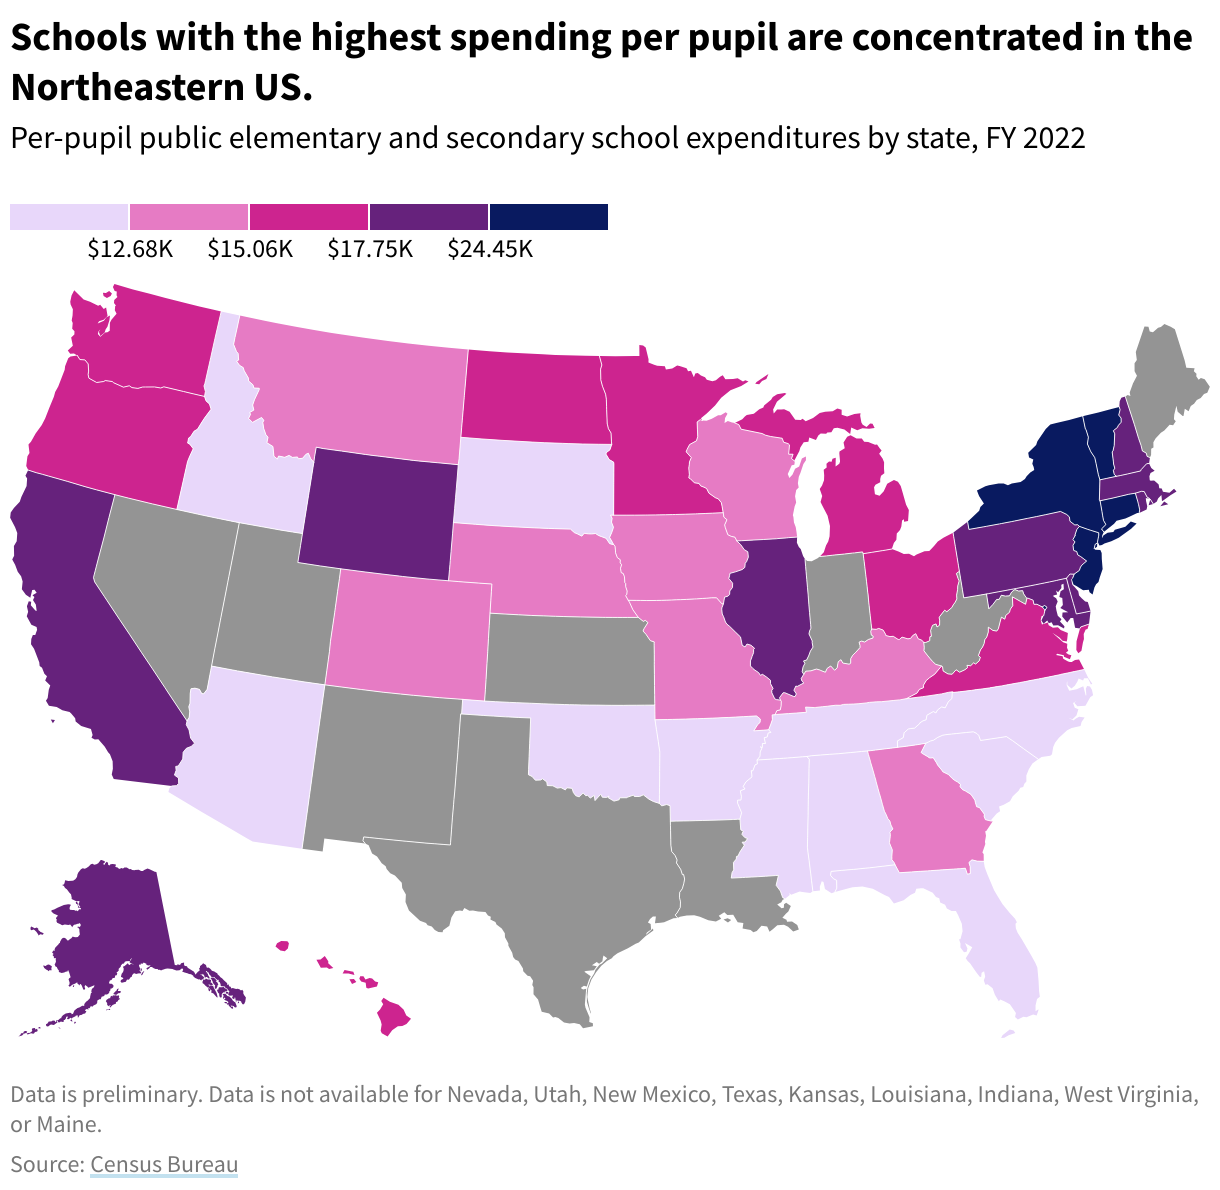 Map of the US with each state represented by a hexagon. Map shows per-pupil public school expenditures by state in 2022. Schools with the highest spending per pupil are concentrated in the Northeastern US. 